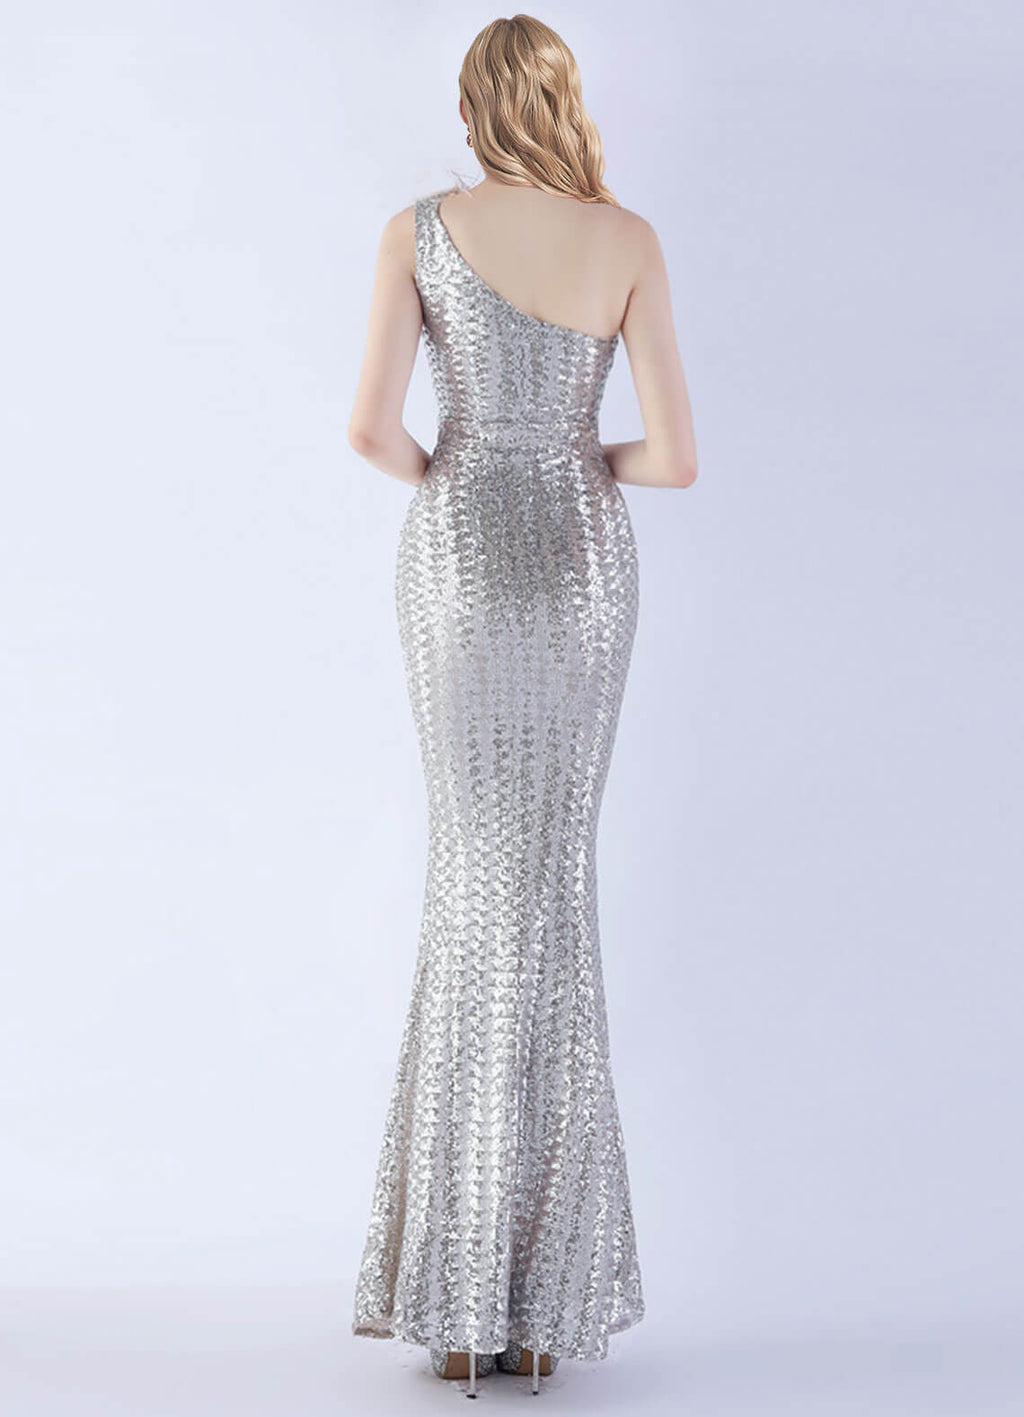 NZ Bridal Silver Feather Mermaid Maxi Sequin Prom Dress 31359 Ruby a